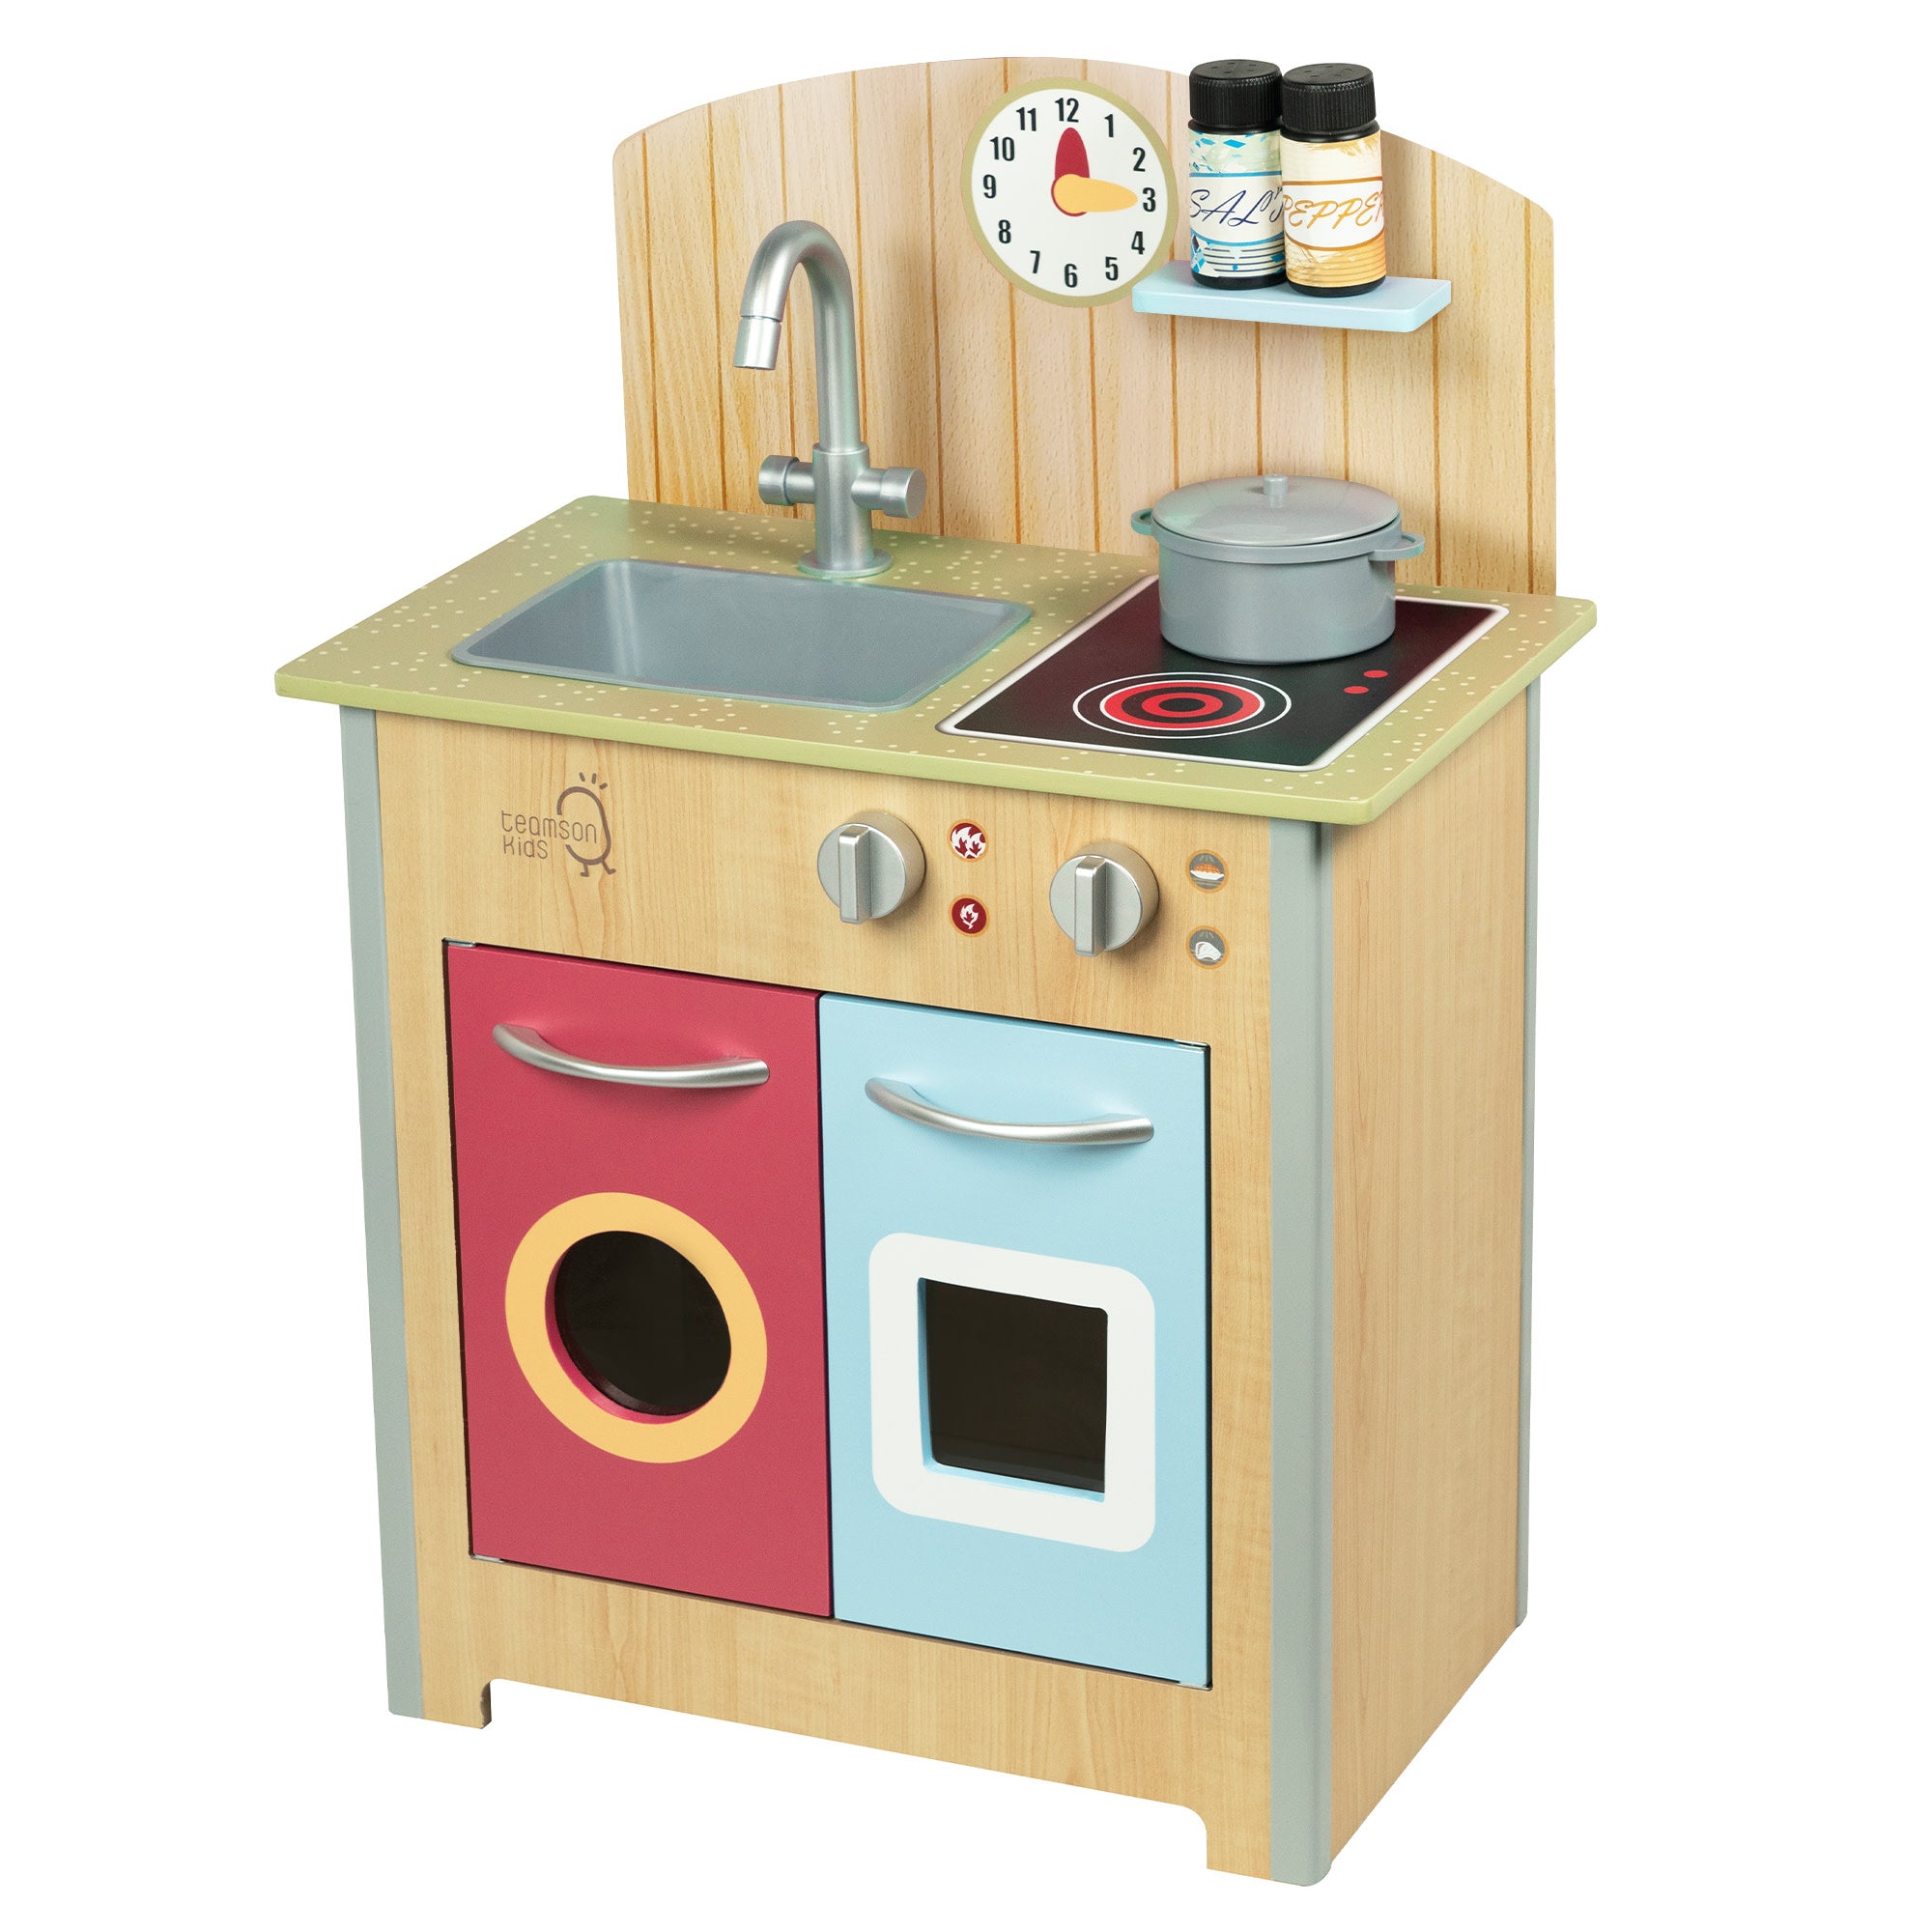 Teamson Kids Little Chef Porto Classic Wooden Kitchen Playset, Natural